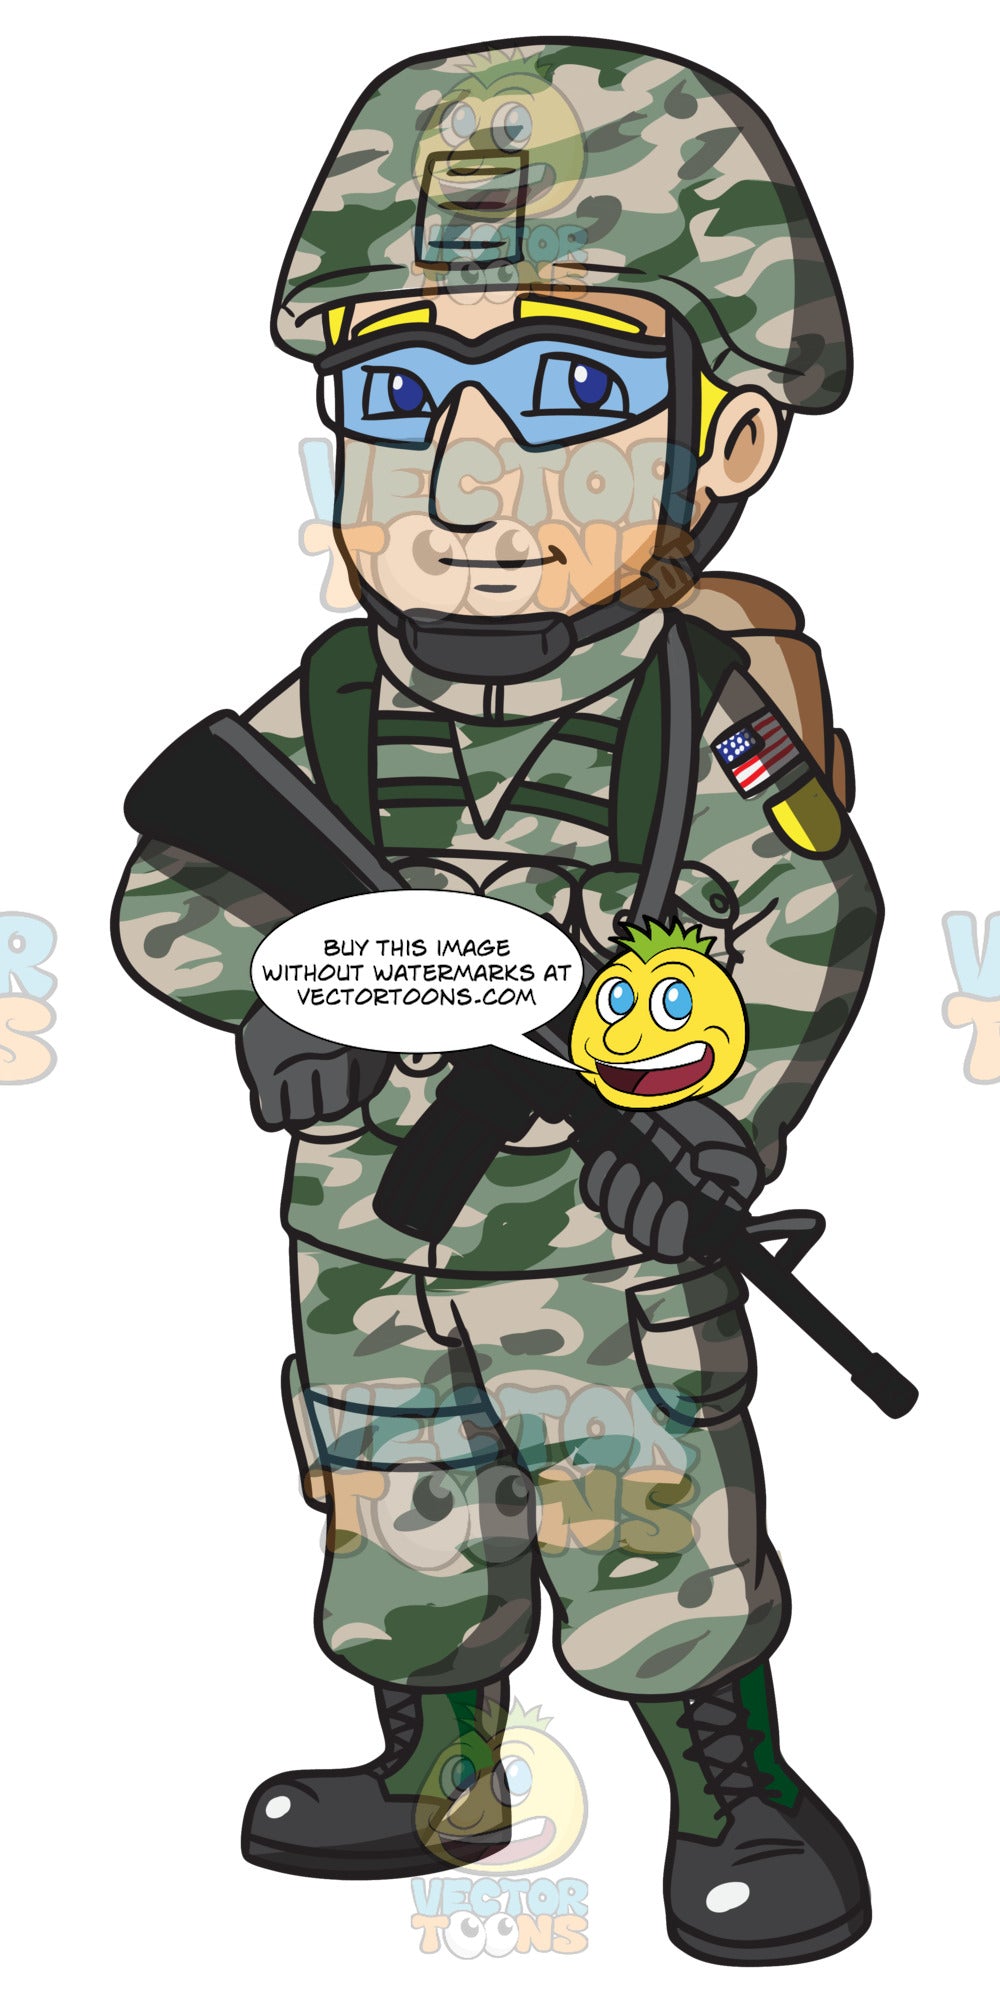 A Us Army Infantry Soldier In Uniform Clipart Cartoons By Vectortoons Find & download free graphic resources for soldier cartoon. a us army infantry soldier in uniform clipart cartoons by vectortoons